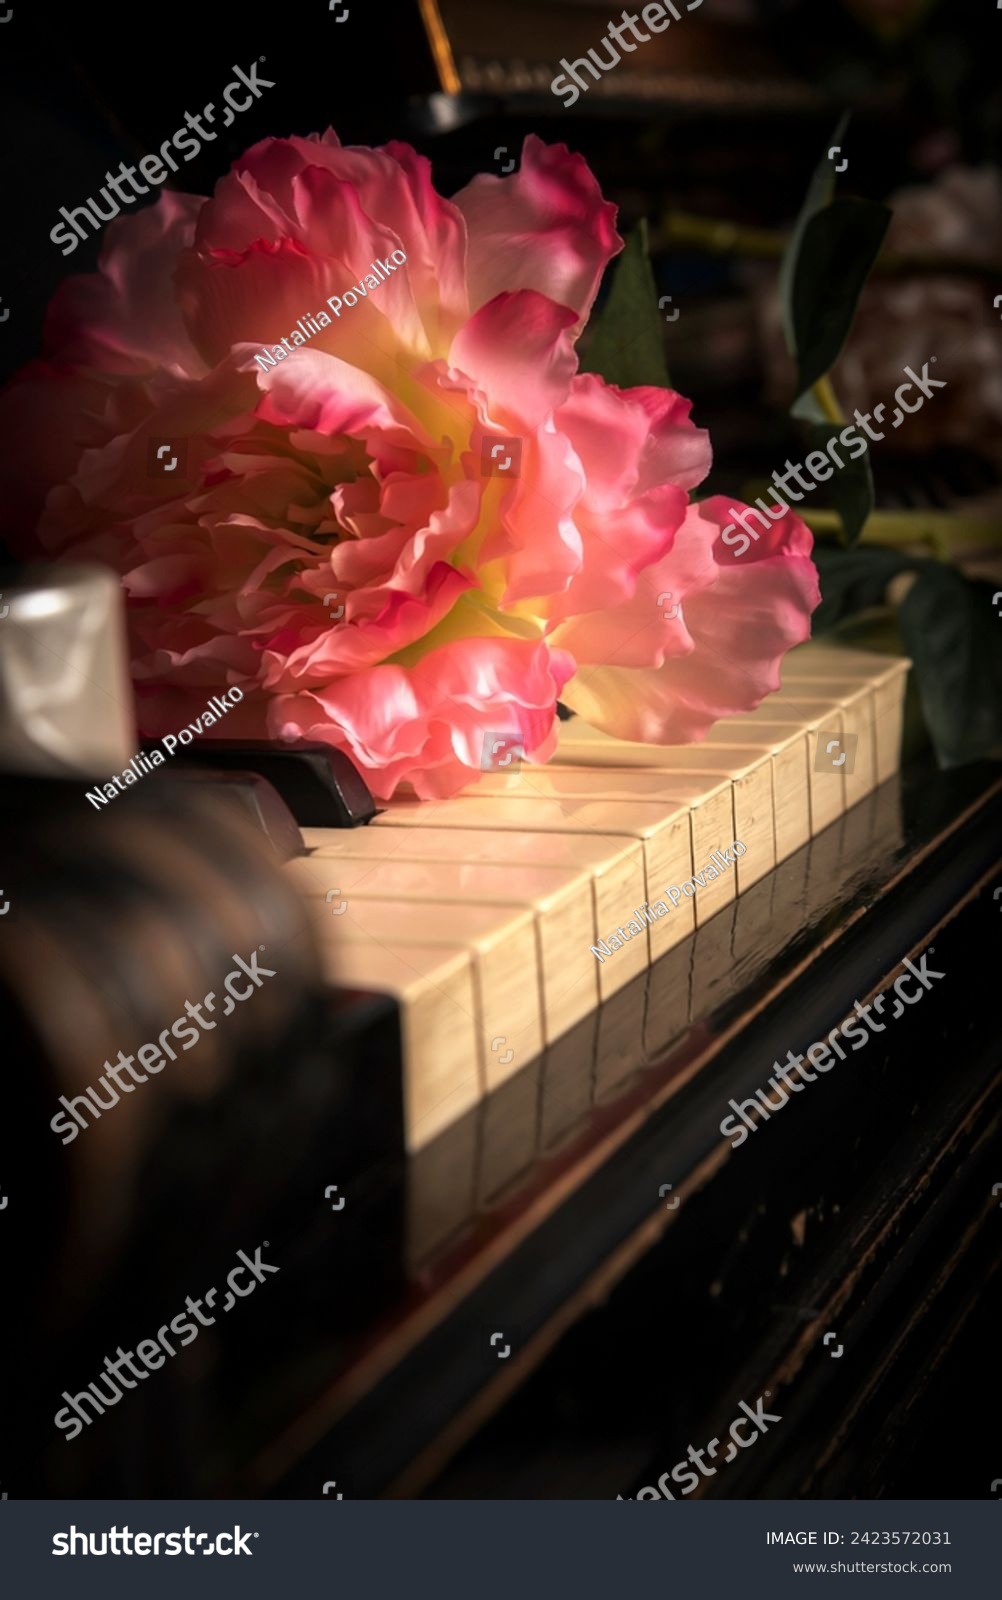 The combination of a rose and a piano, symbolizing the union of art and music in one frame. #2423572031